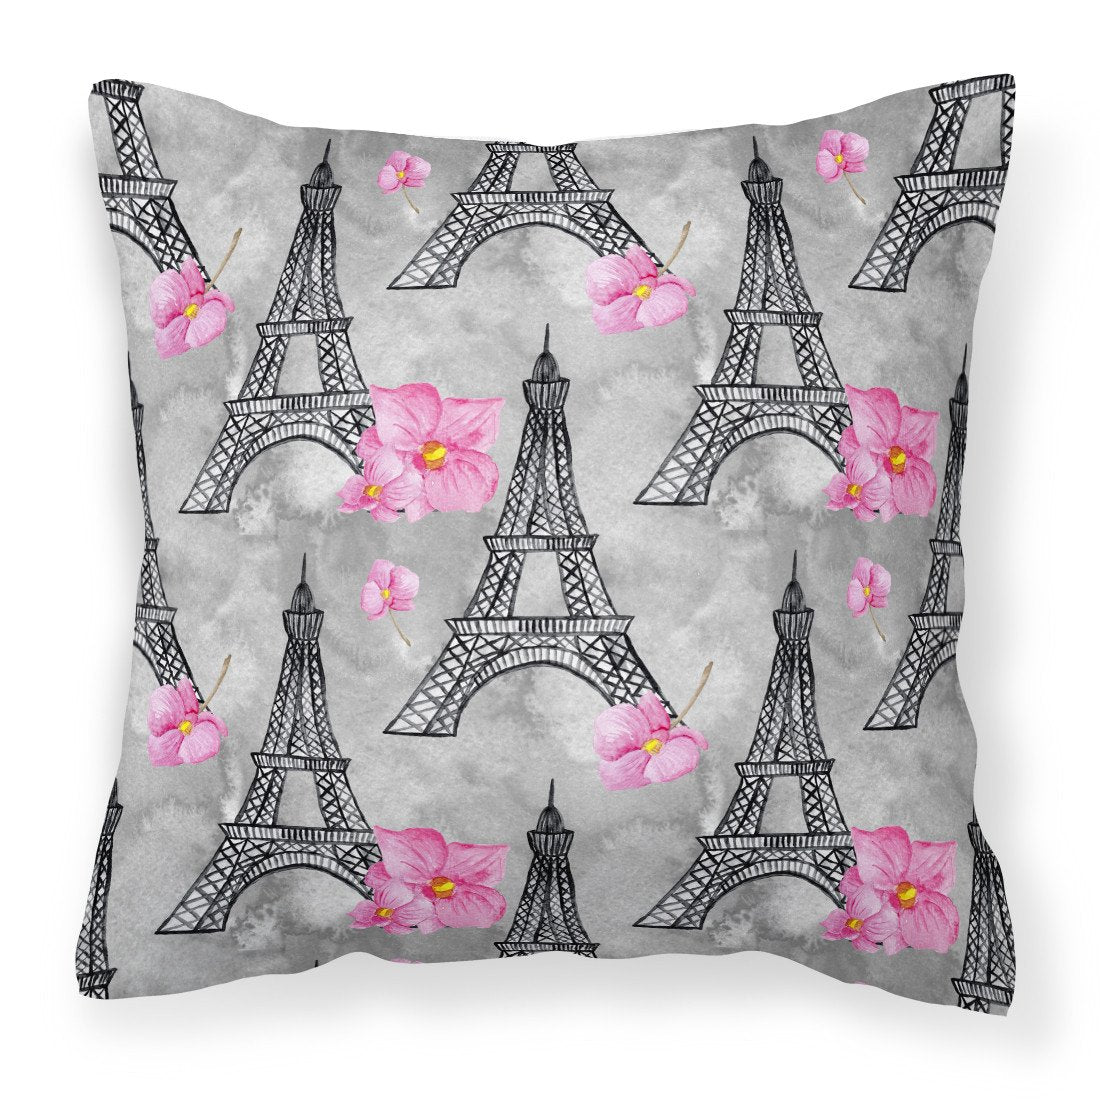 Watercolor Pink Flowers Eiffel Tower Fabric Decorative Pillow BB7503PW1818 by Caroline's Treasures